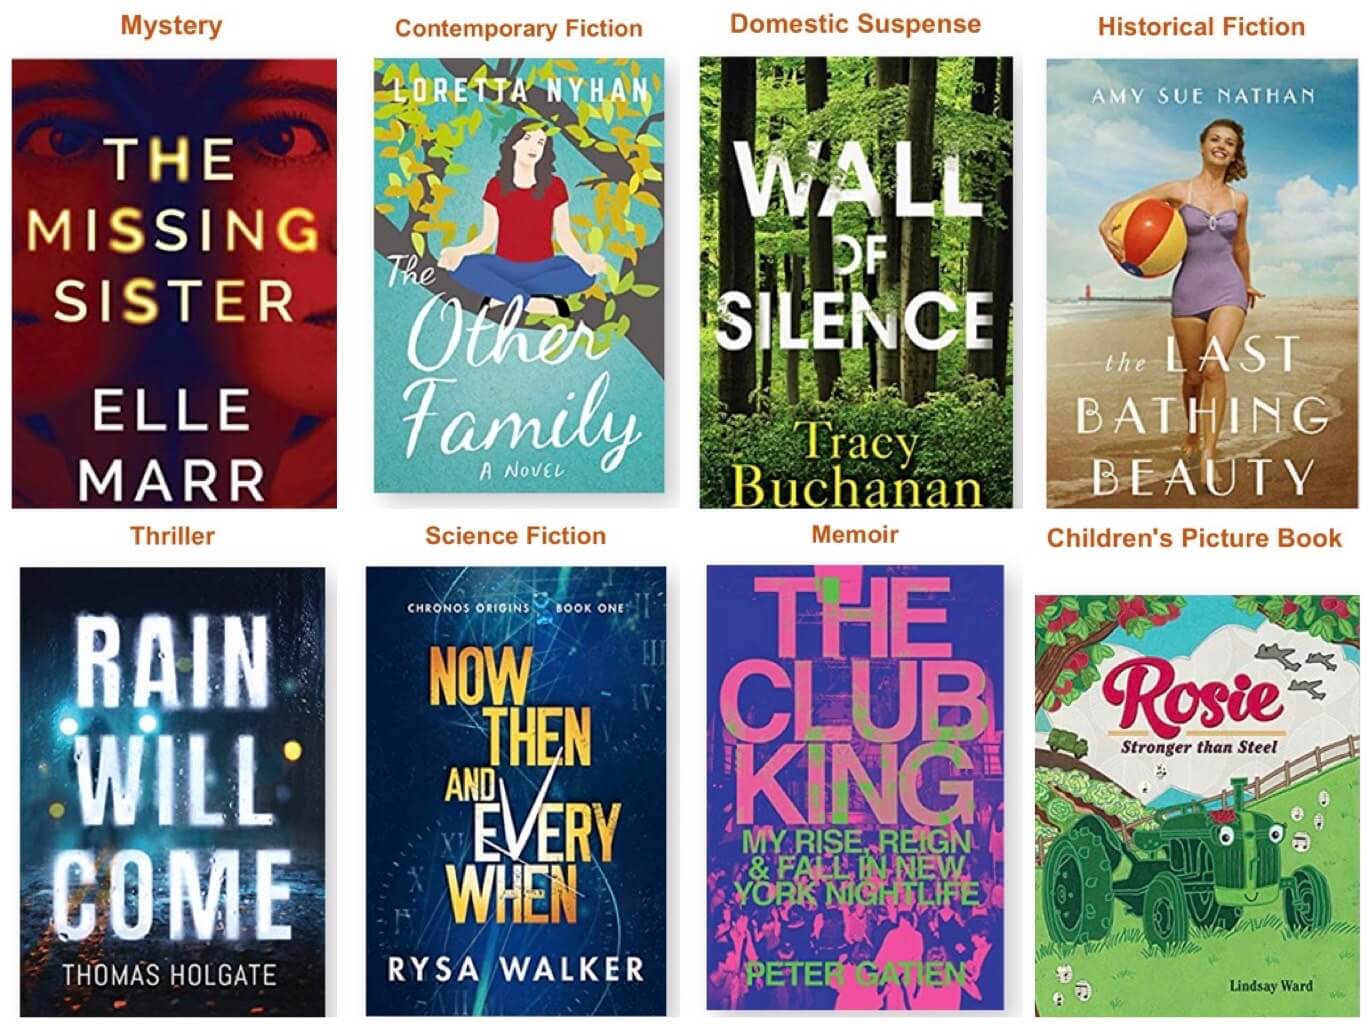 Amazon First Reads for March